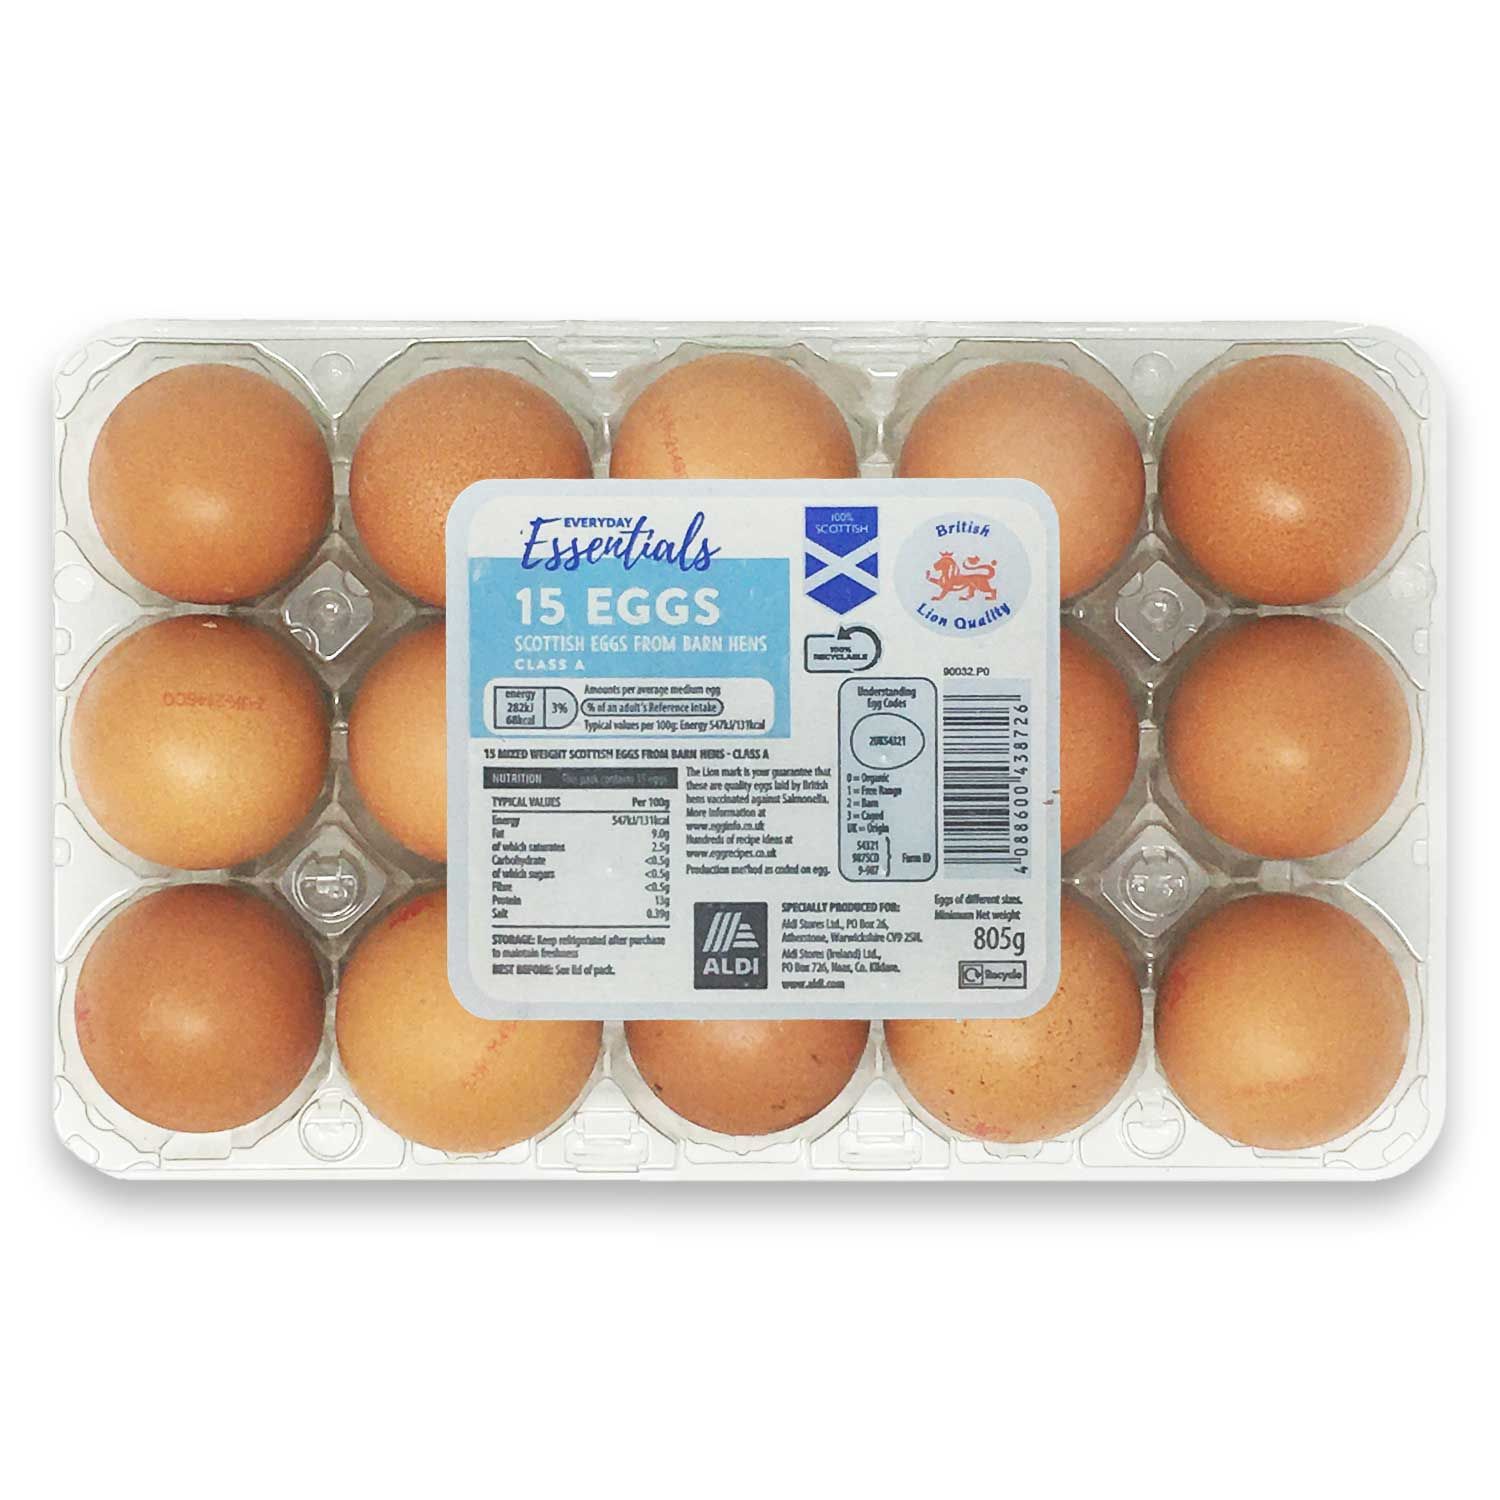 Everyday Essentials Mixed Weight Scottish Eggs From Barn Hens 15 Pack